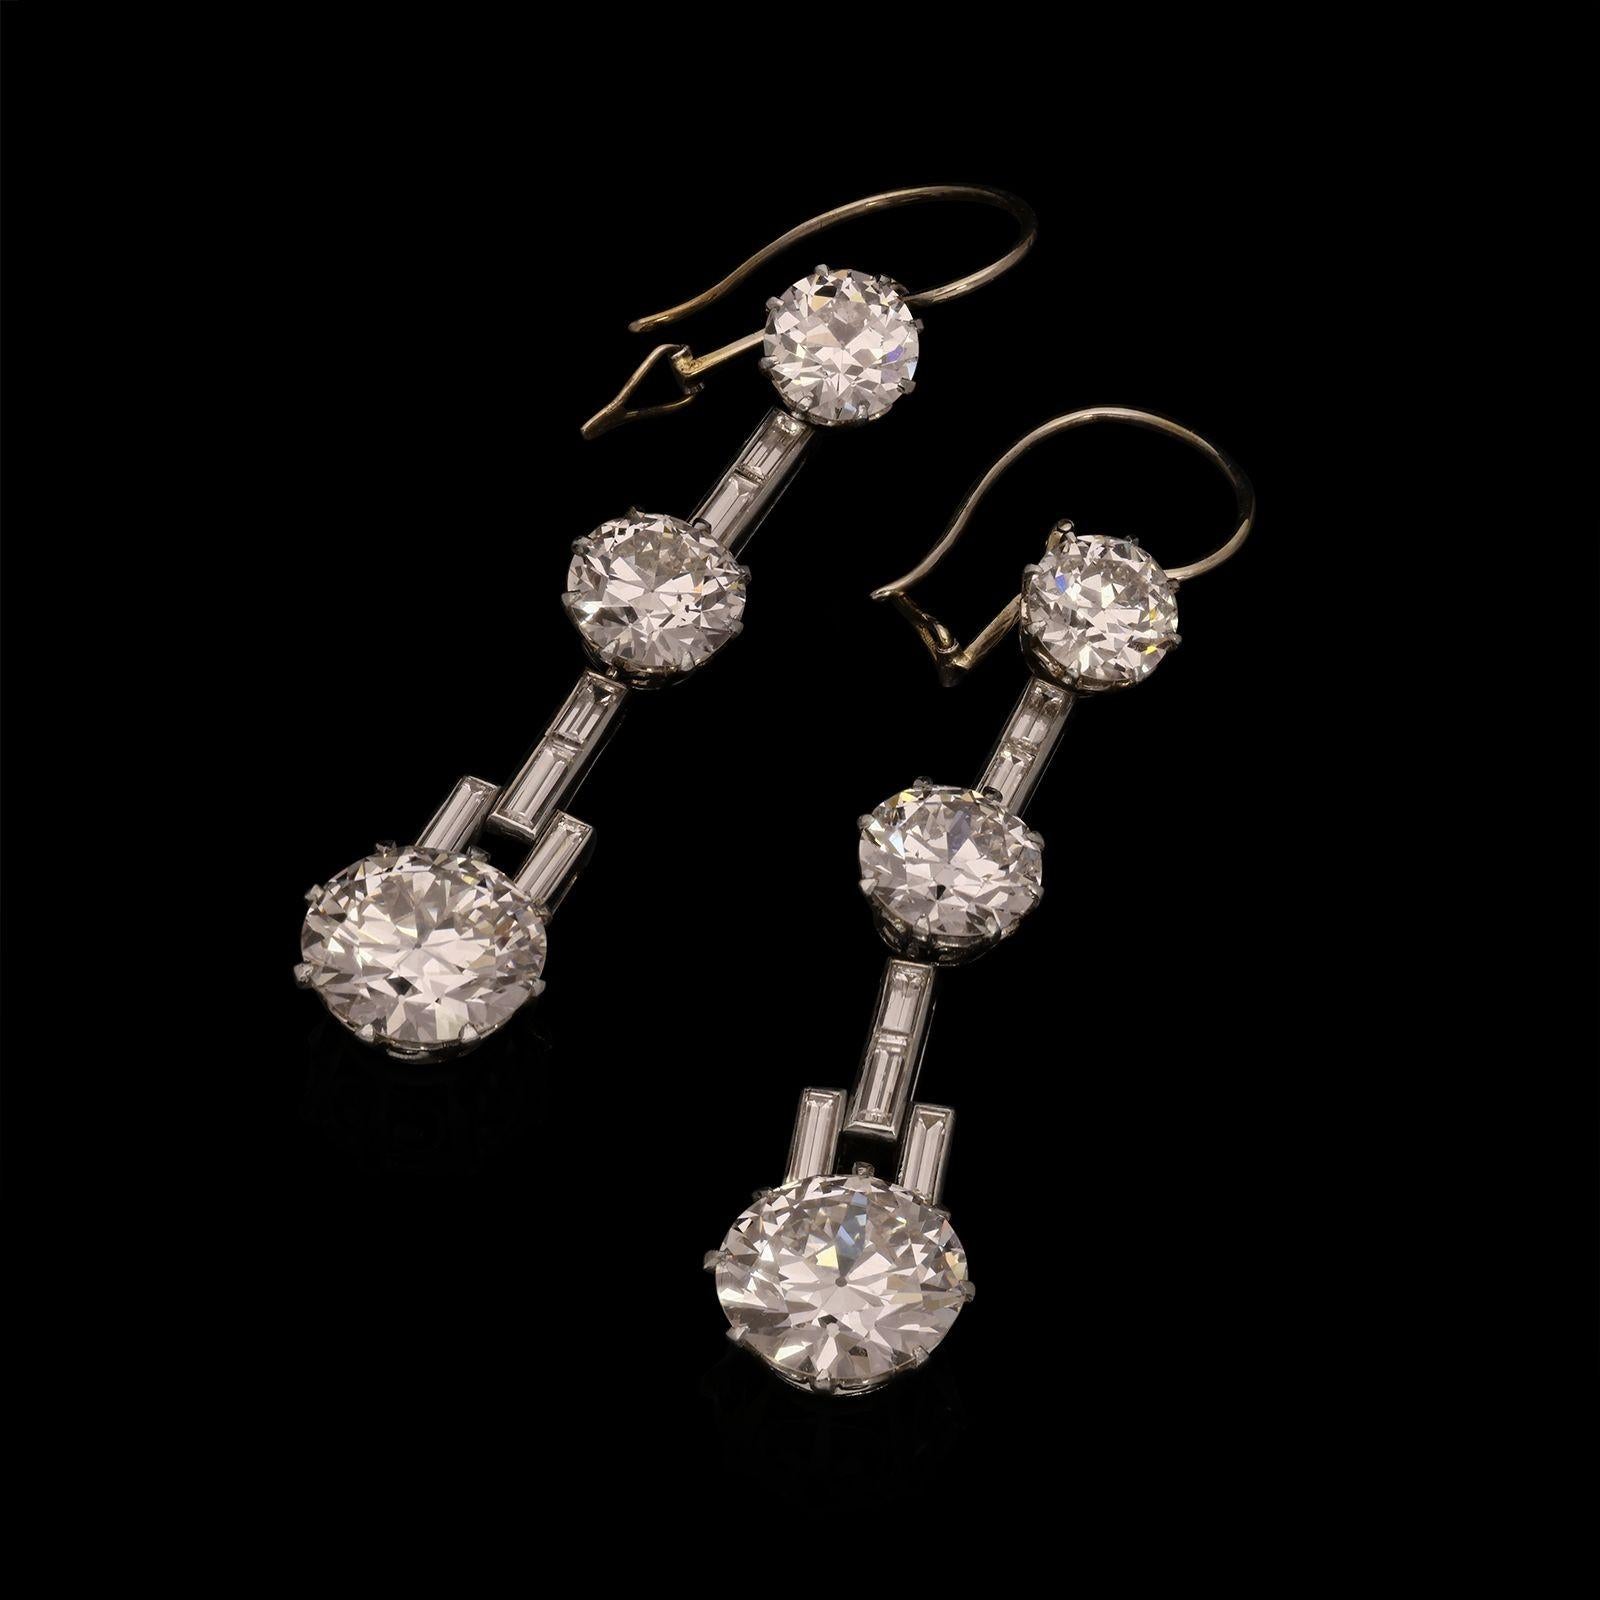 A stunning pair of Art Deco diamond drop earrings c.1935, each designed as a long drop of three graduated old European brilliant cut diamonds weighing a combined total of 7.67cts, interspersed with baguette diamonds in a geometric step formation,